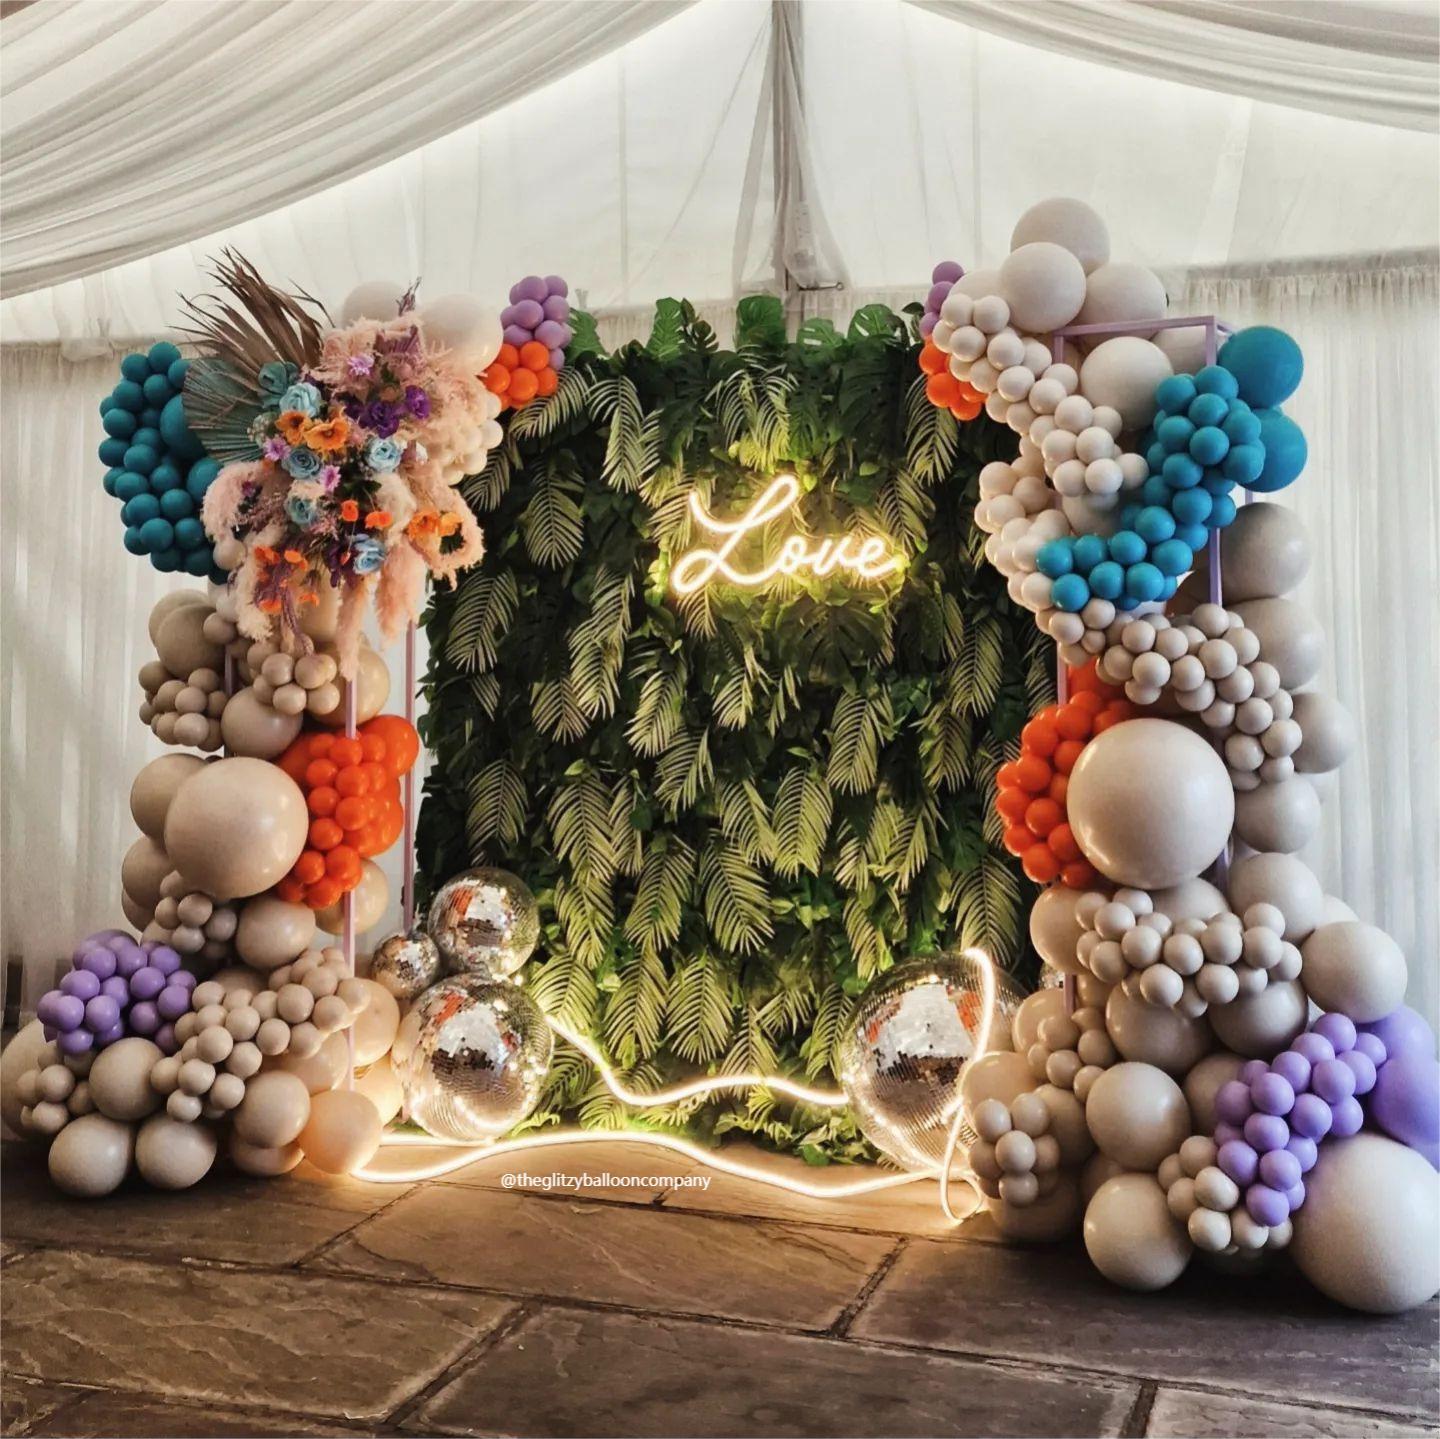 Balloons and LED lights make the rainforest fabric flower wall even more fantastic.